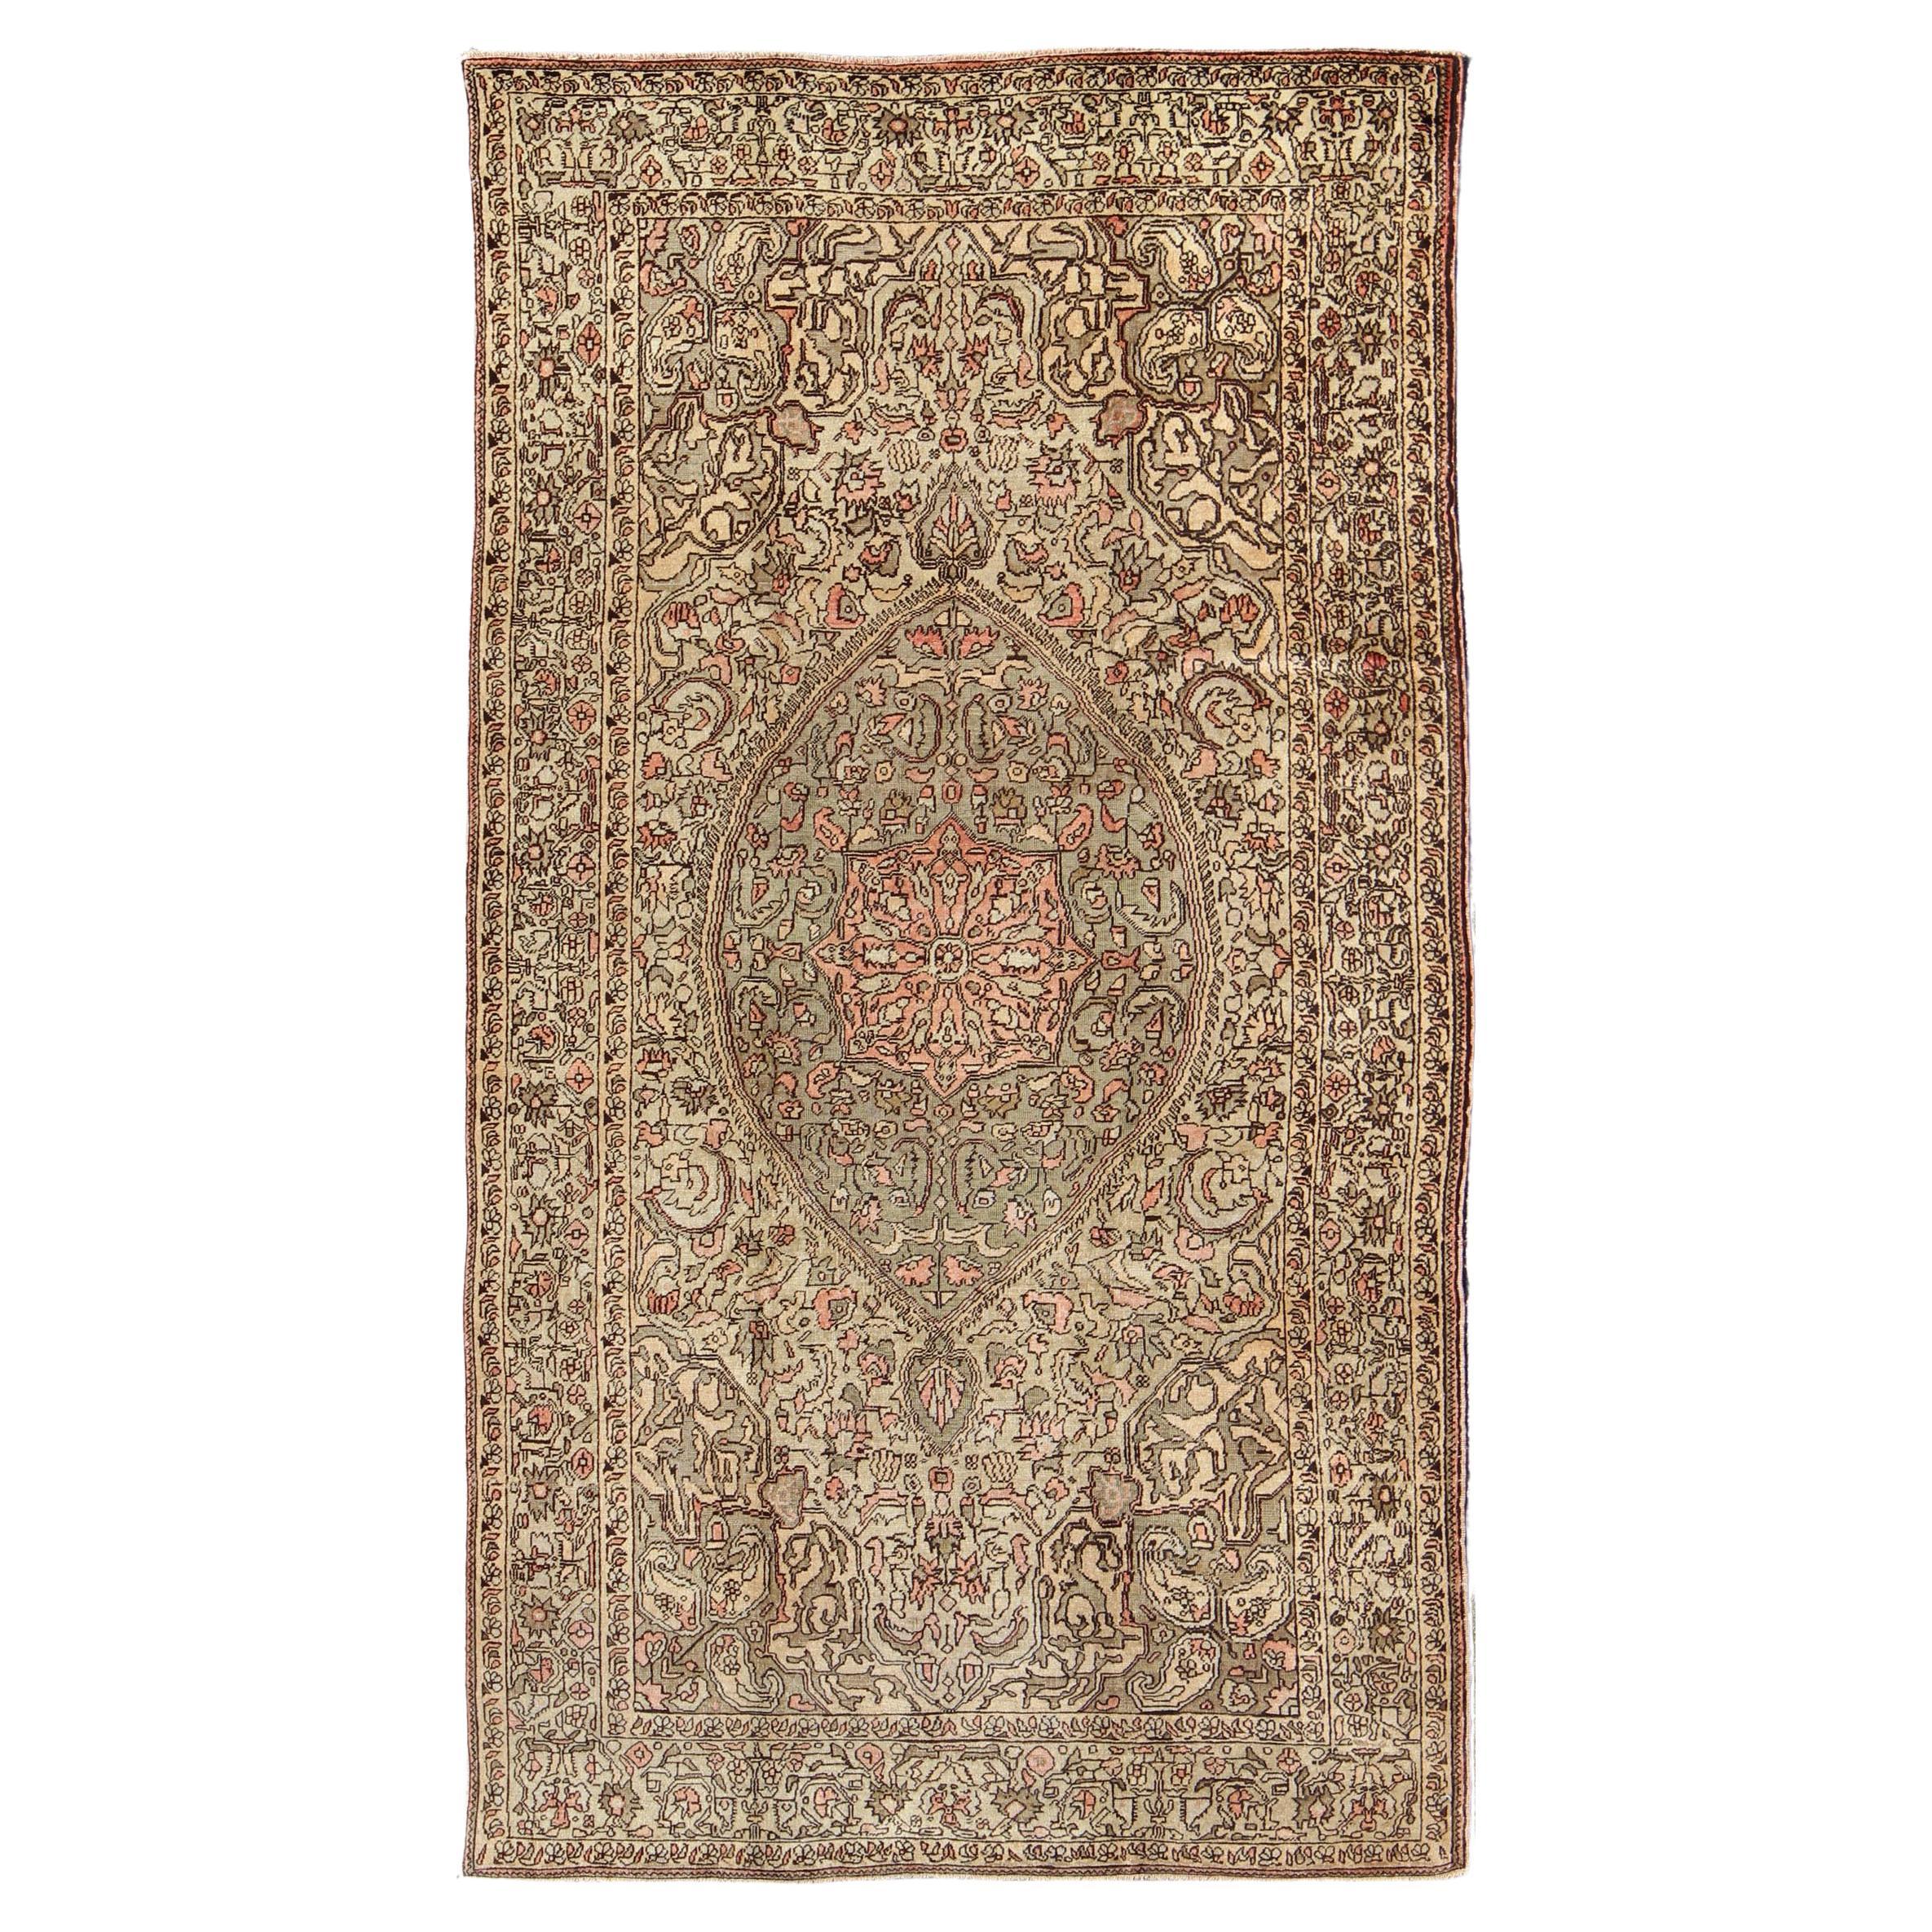 Vintage Turkish Sivas with Floral Central Medallion in Coral and Earthy Tones